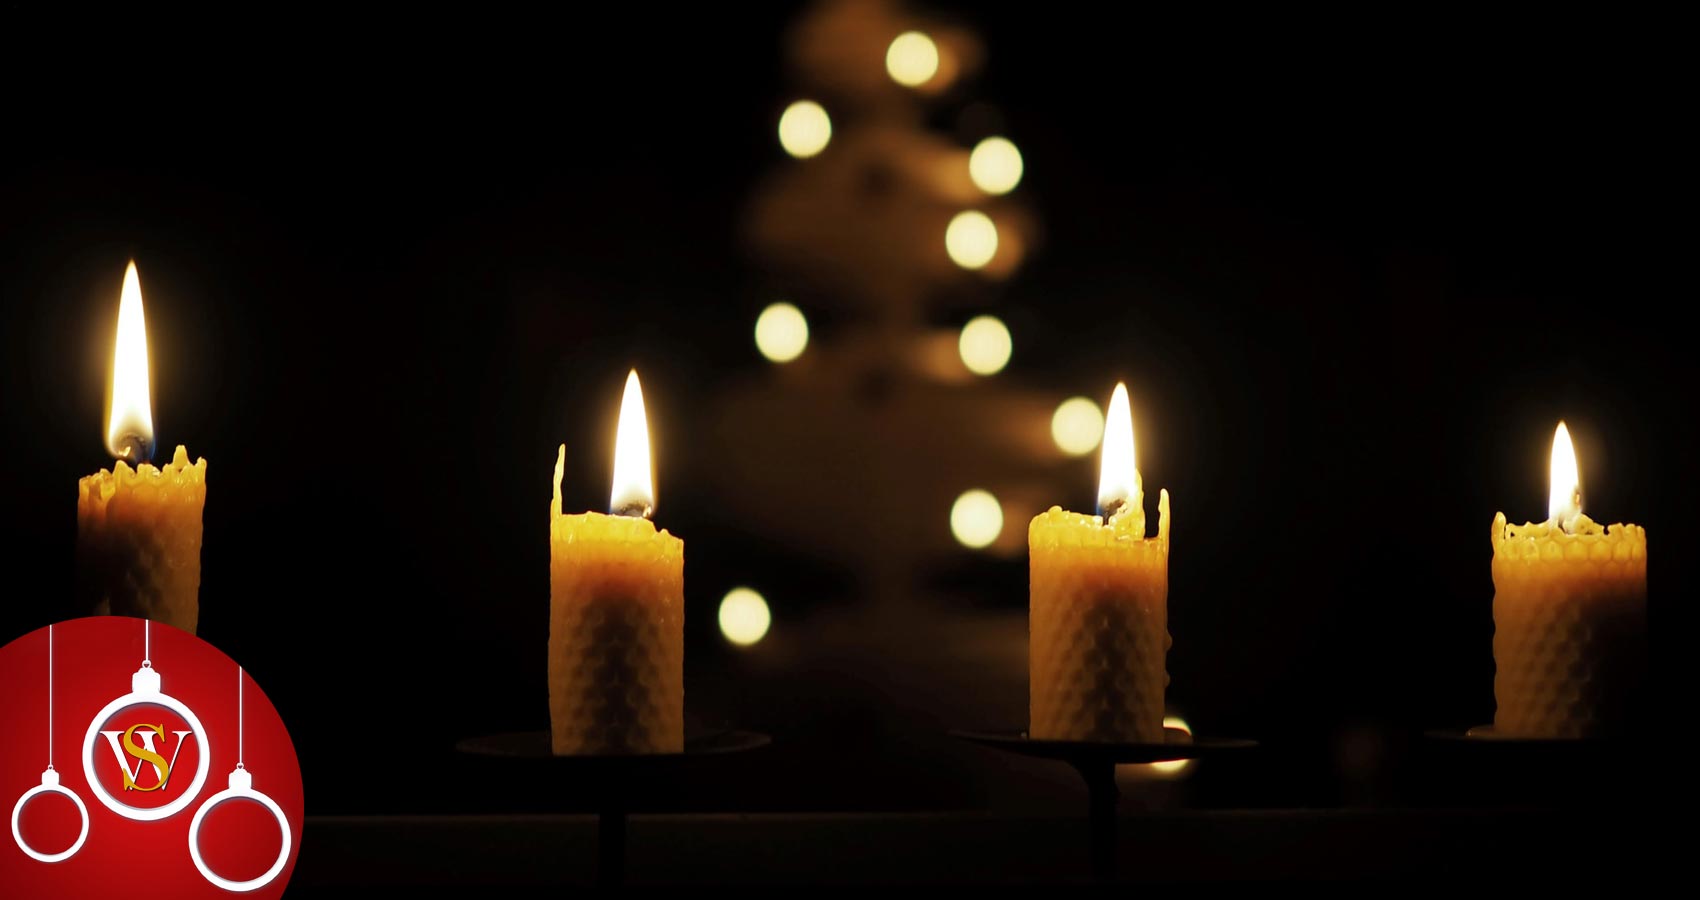 Si Muore Anche a Natale, a poem by Francesco Abate at Spillwords.com